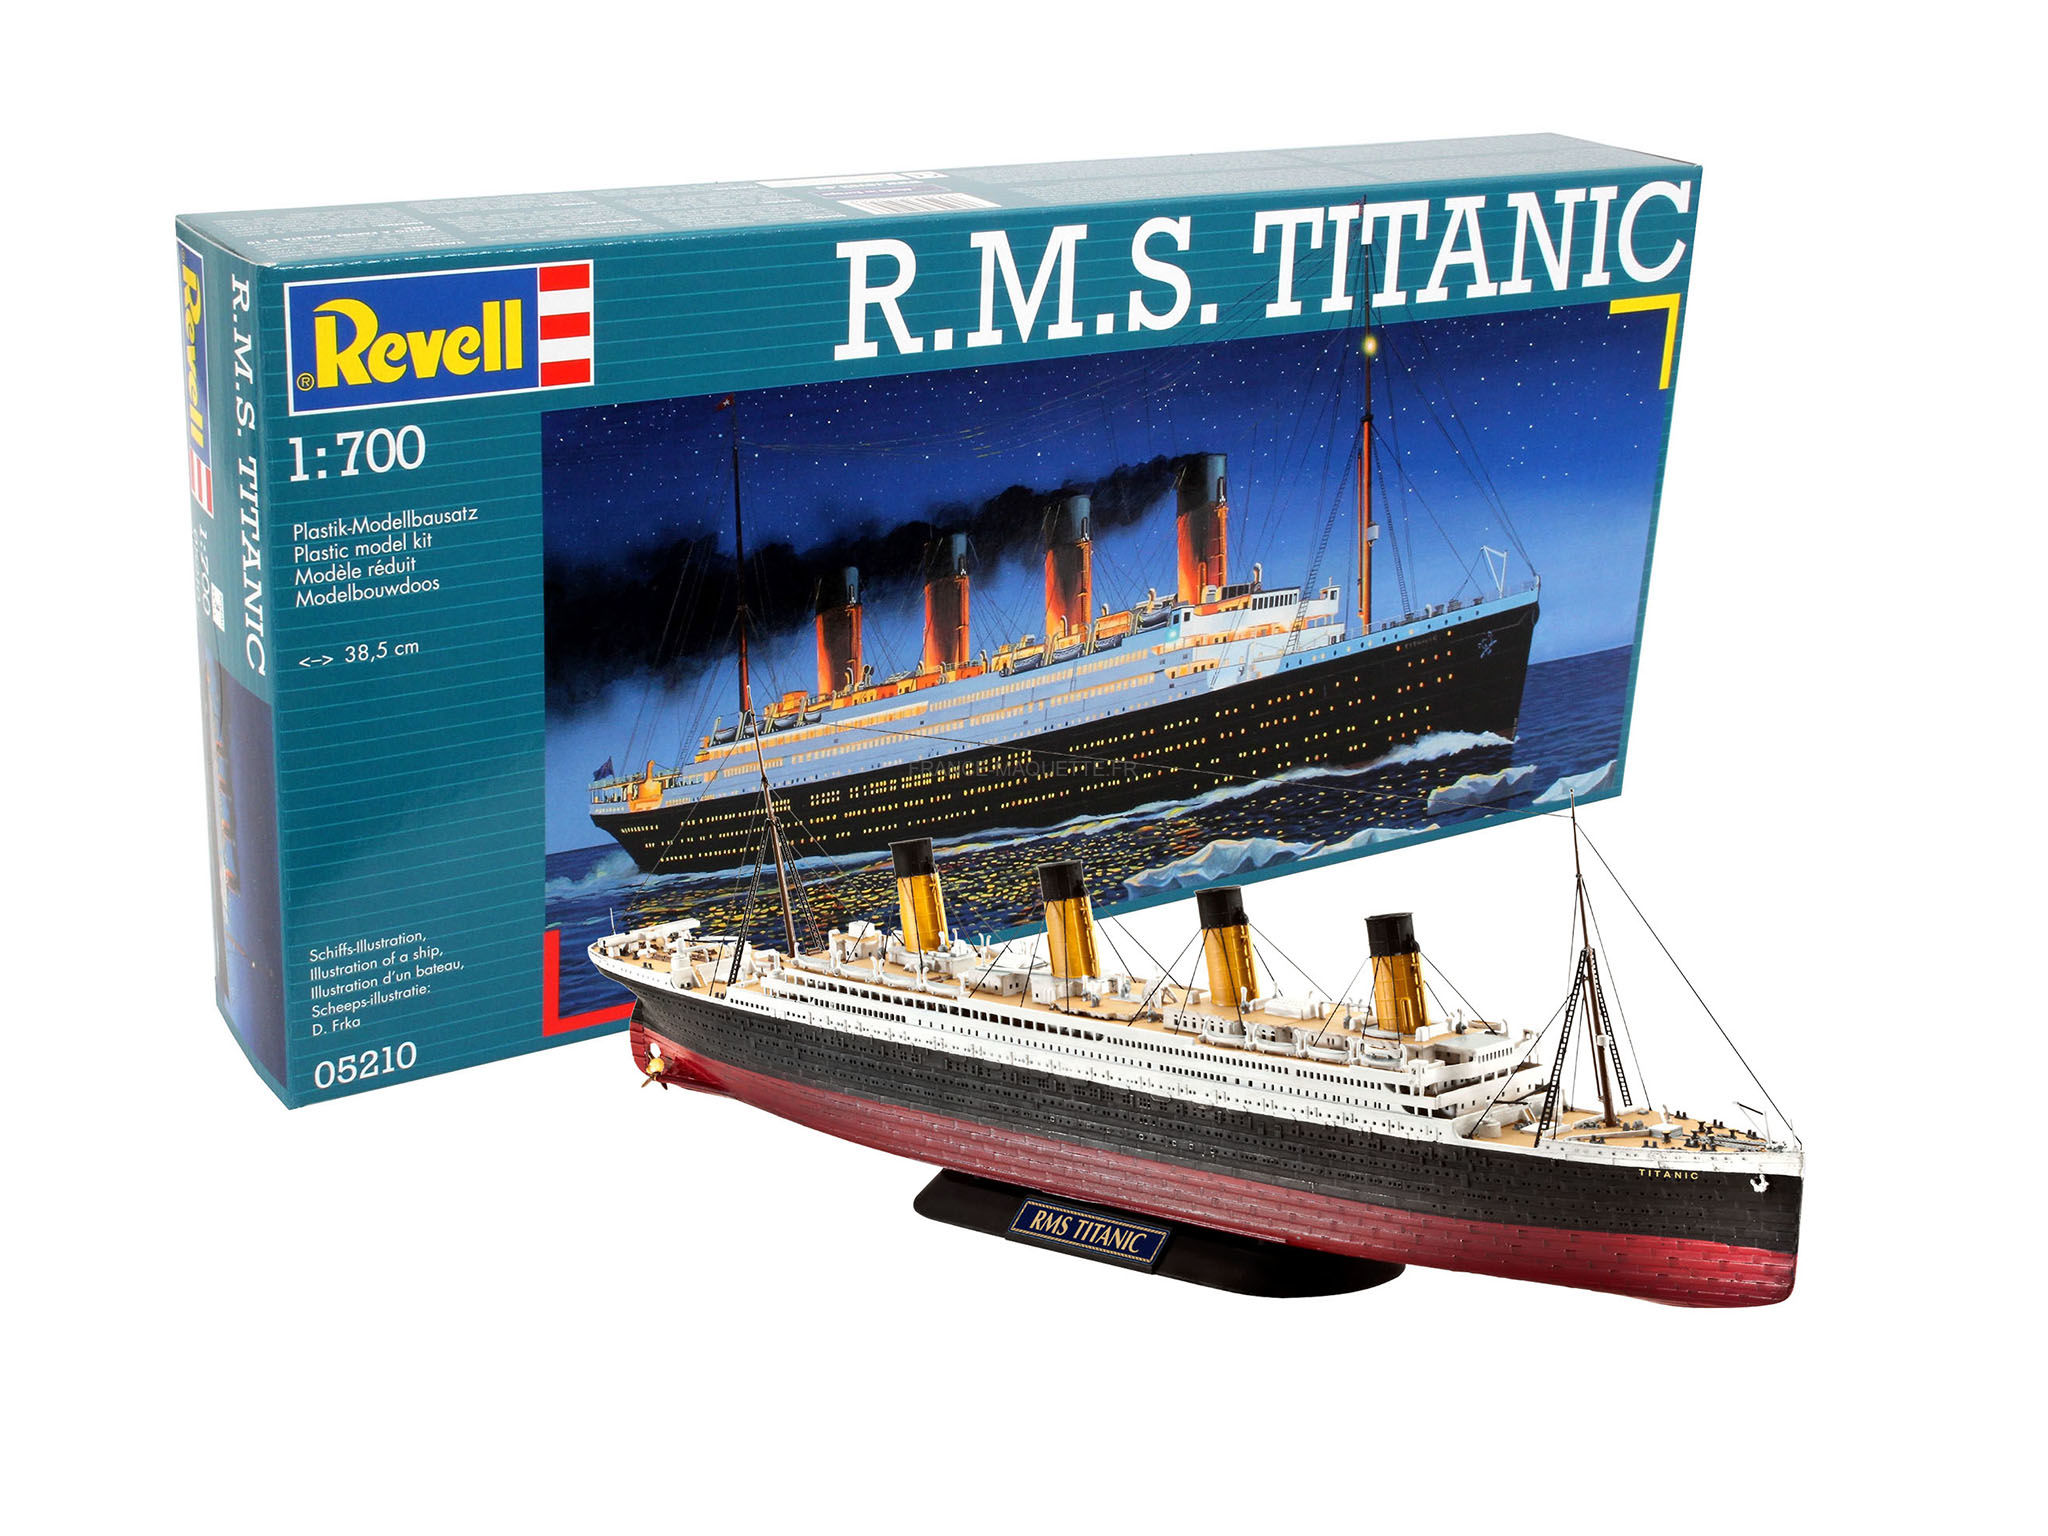 https://www.france-maquette.fr/images/watermarked/1/detailed/32/REV-05210__R.M.S._TITANIC.jpg